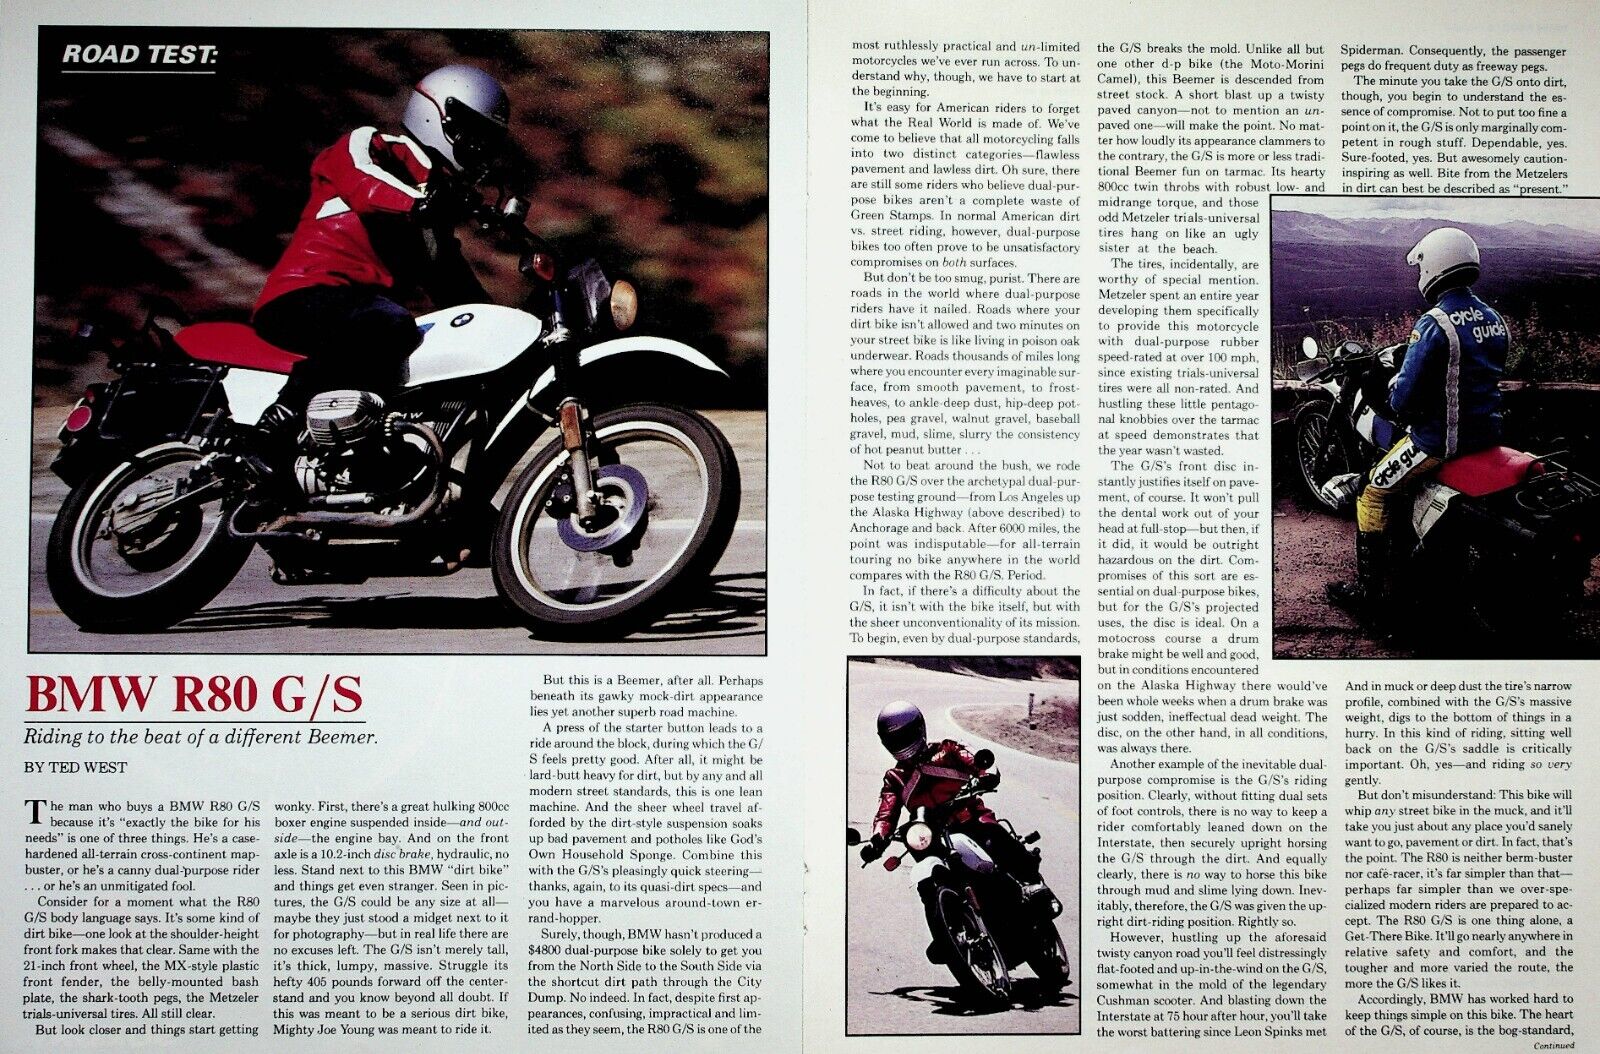 1981 BMW R80 GS - 6-Page Vintage Motorcycle Road Test Article